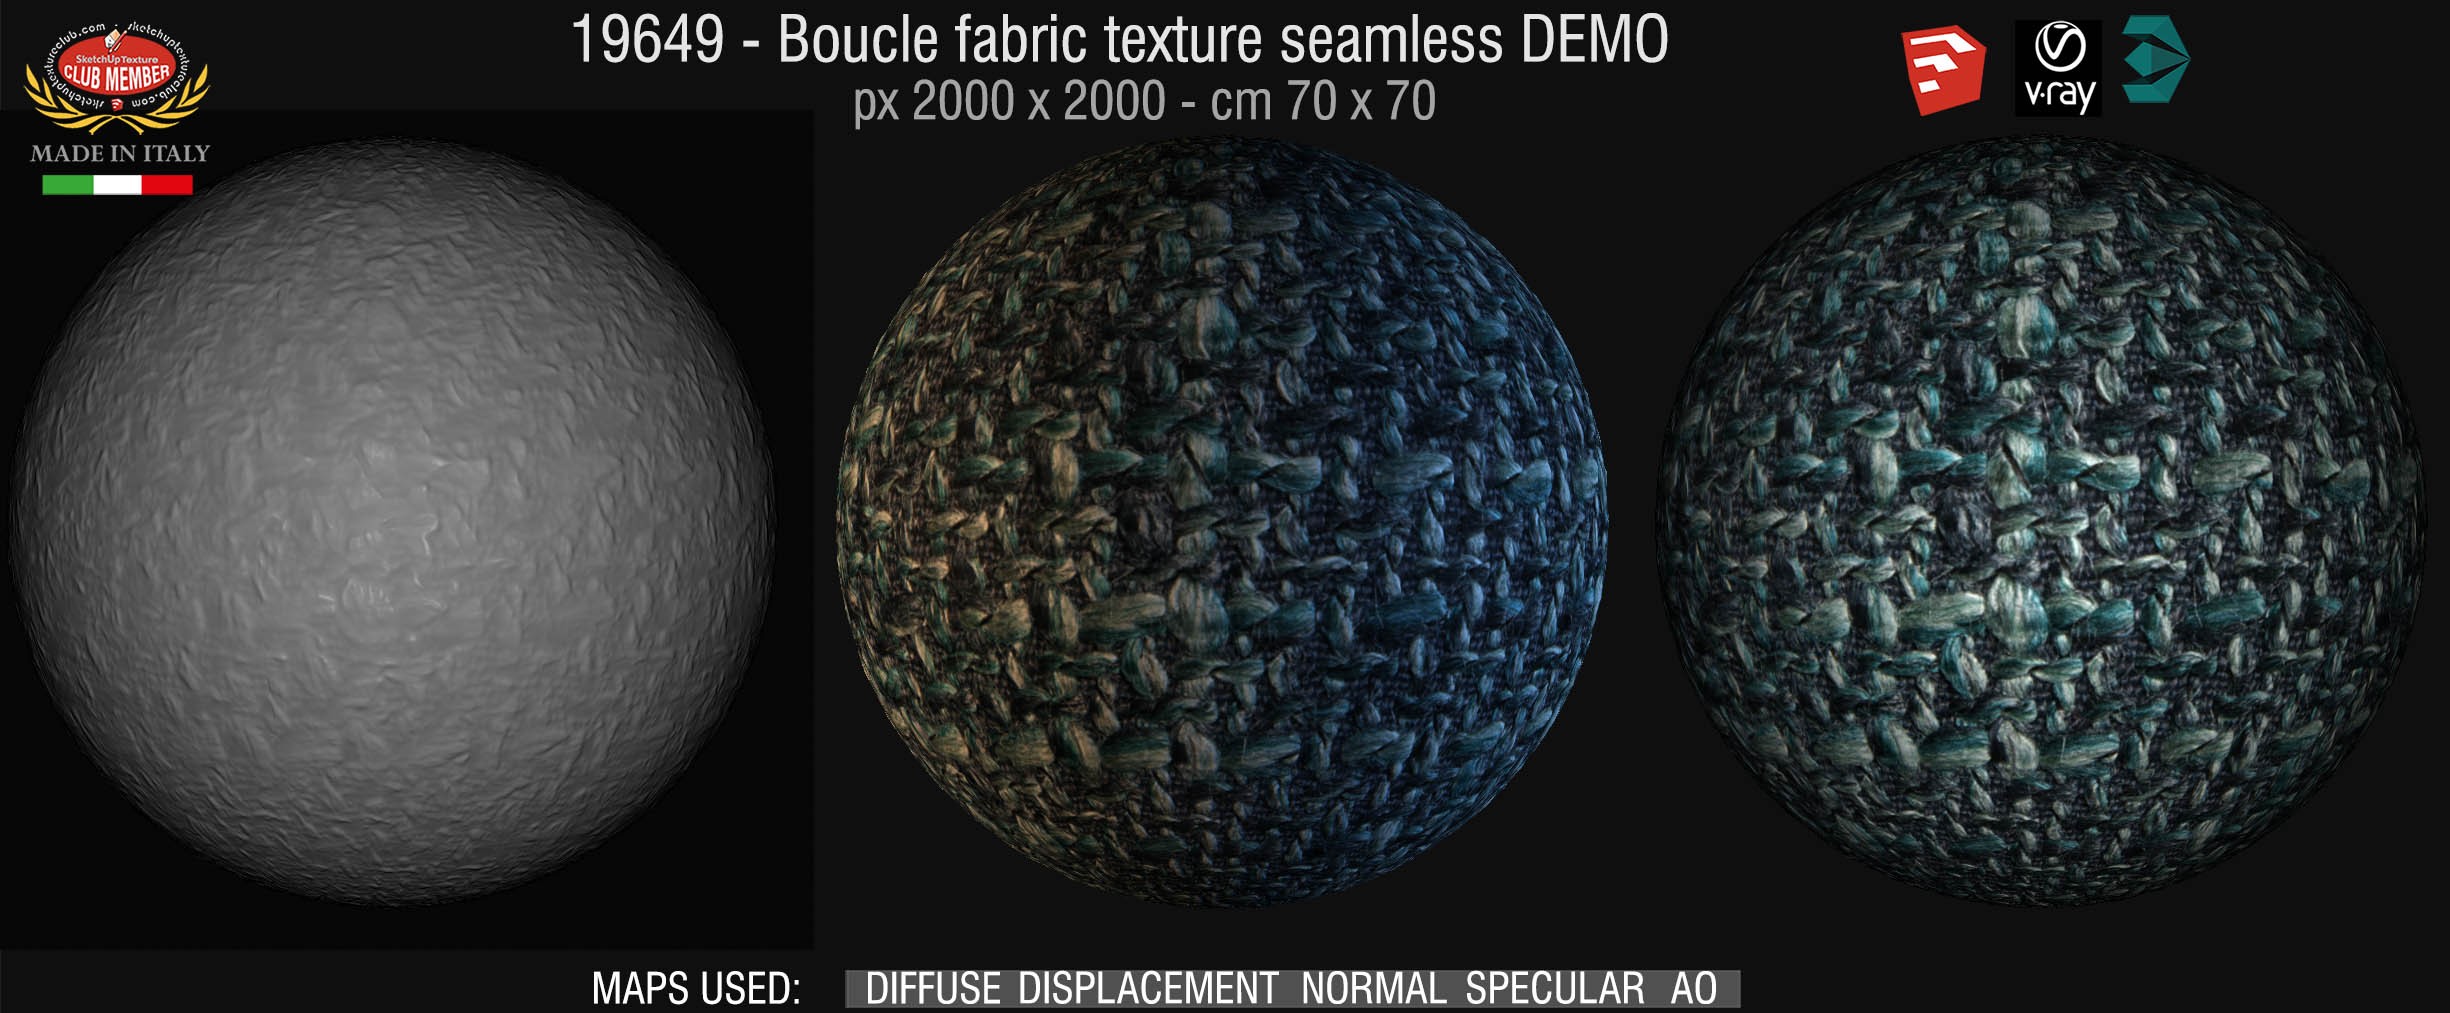 19649 Boucle fabric texture seamless + maps DEMO